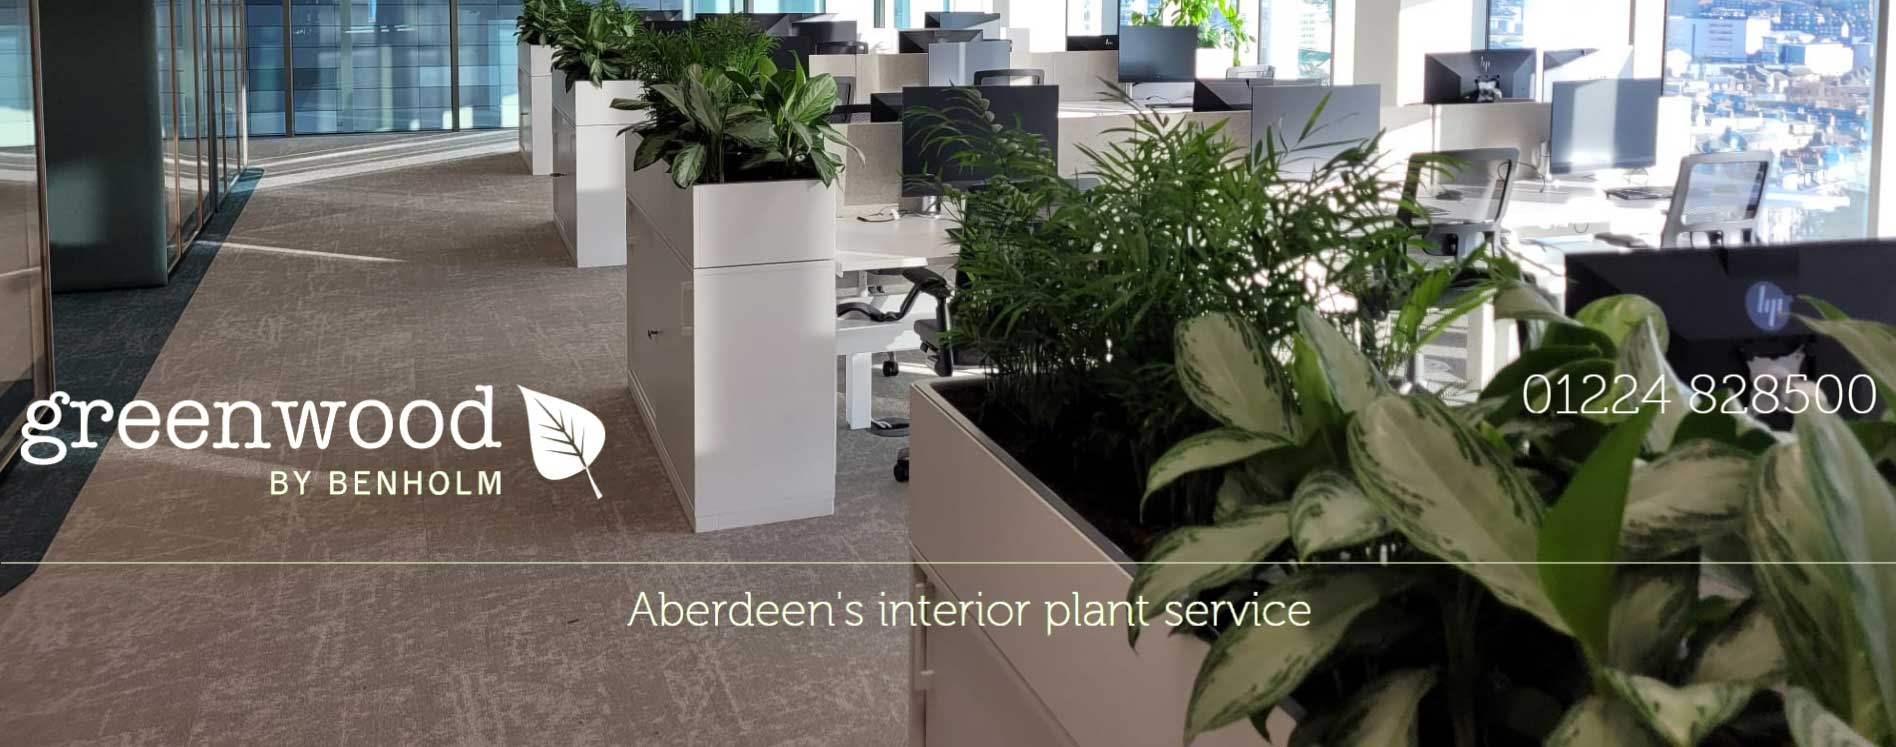 interior plants in aberdeen office cover image